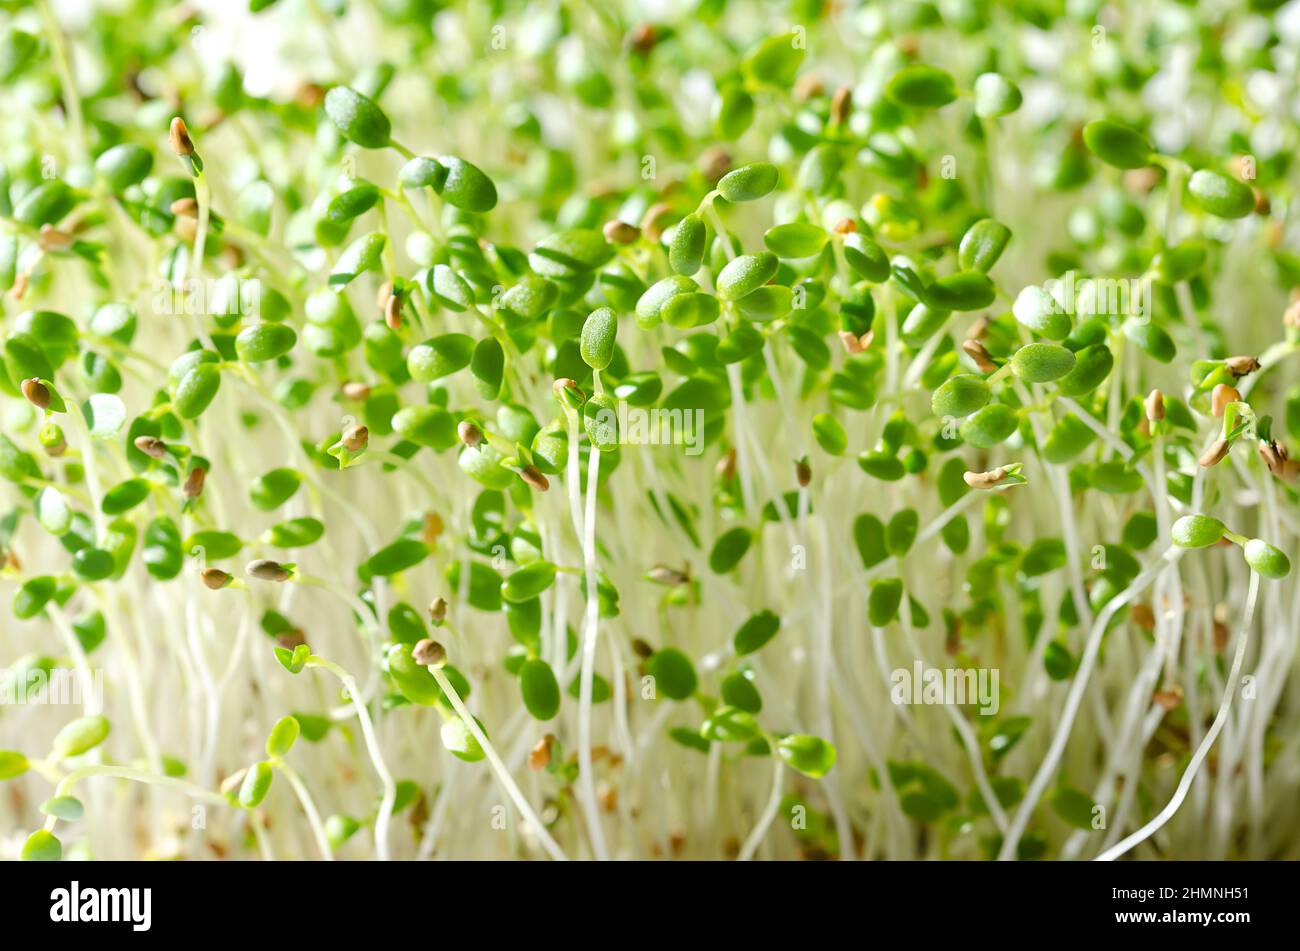 Red clover seedlings, close up. Microgreens and fresh sprouts of Trifolium pratense, a plant in bean family Fabaceae. Green shoots and young plants. Stock Photo